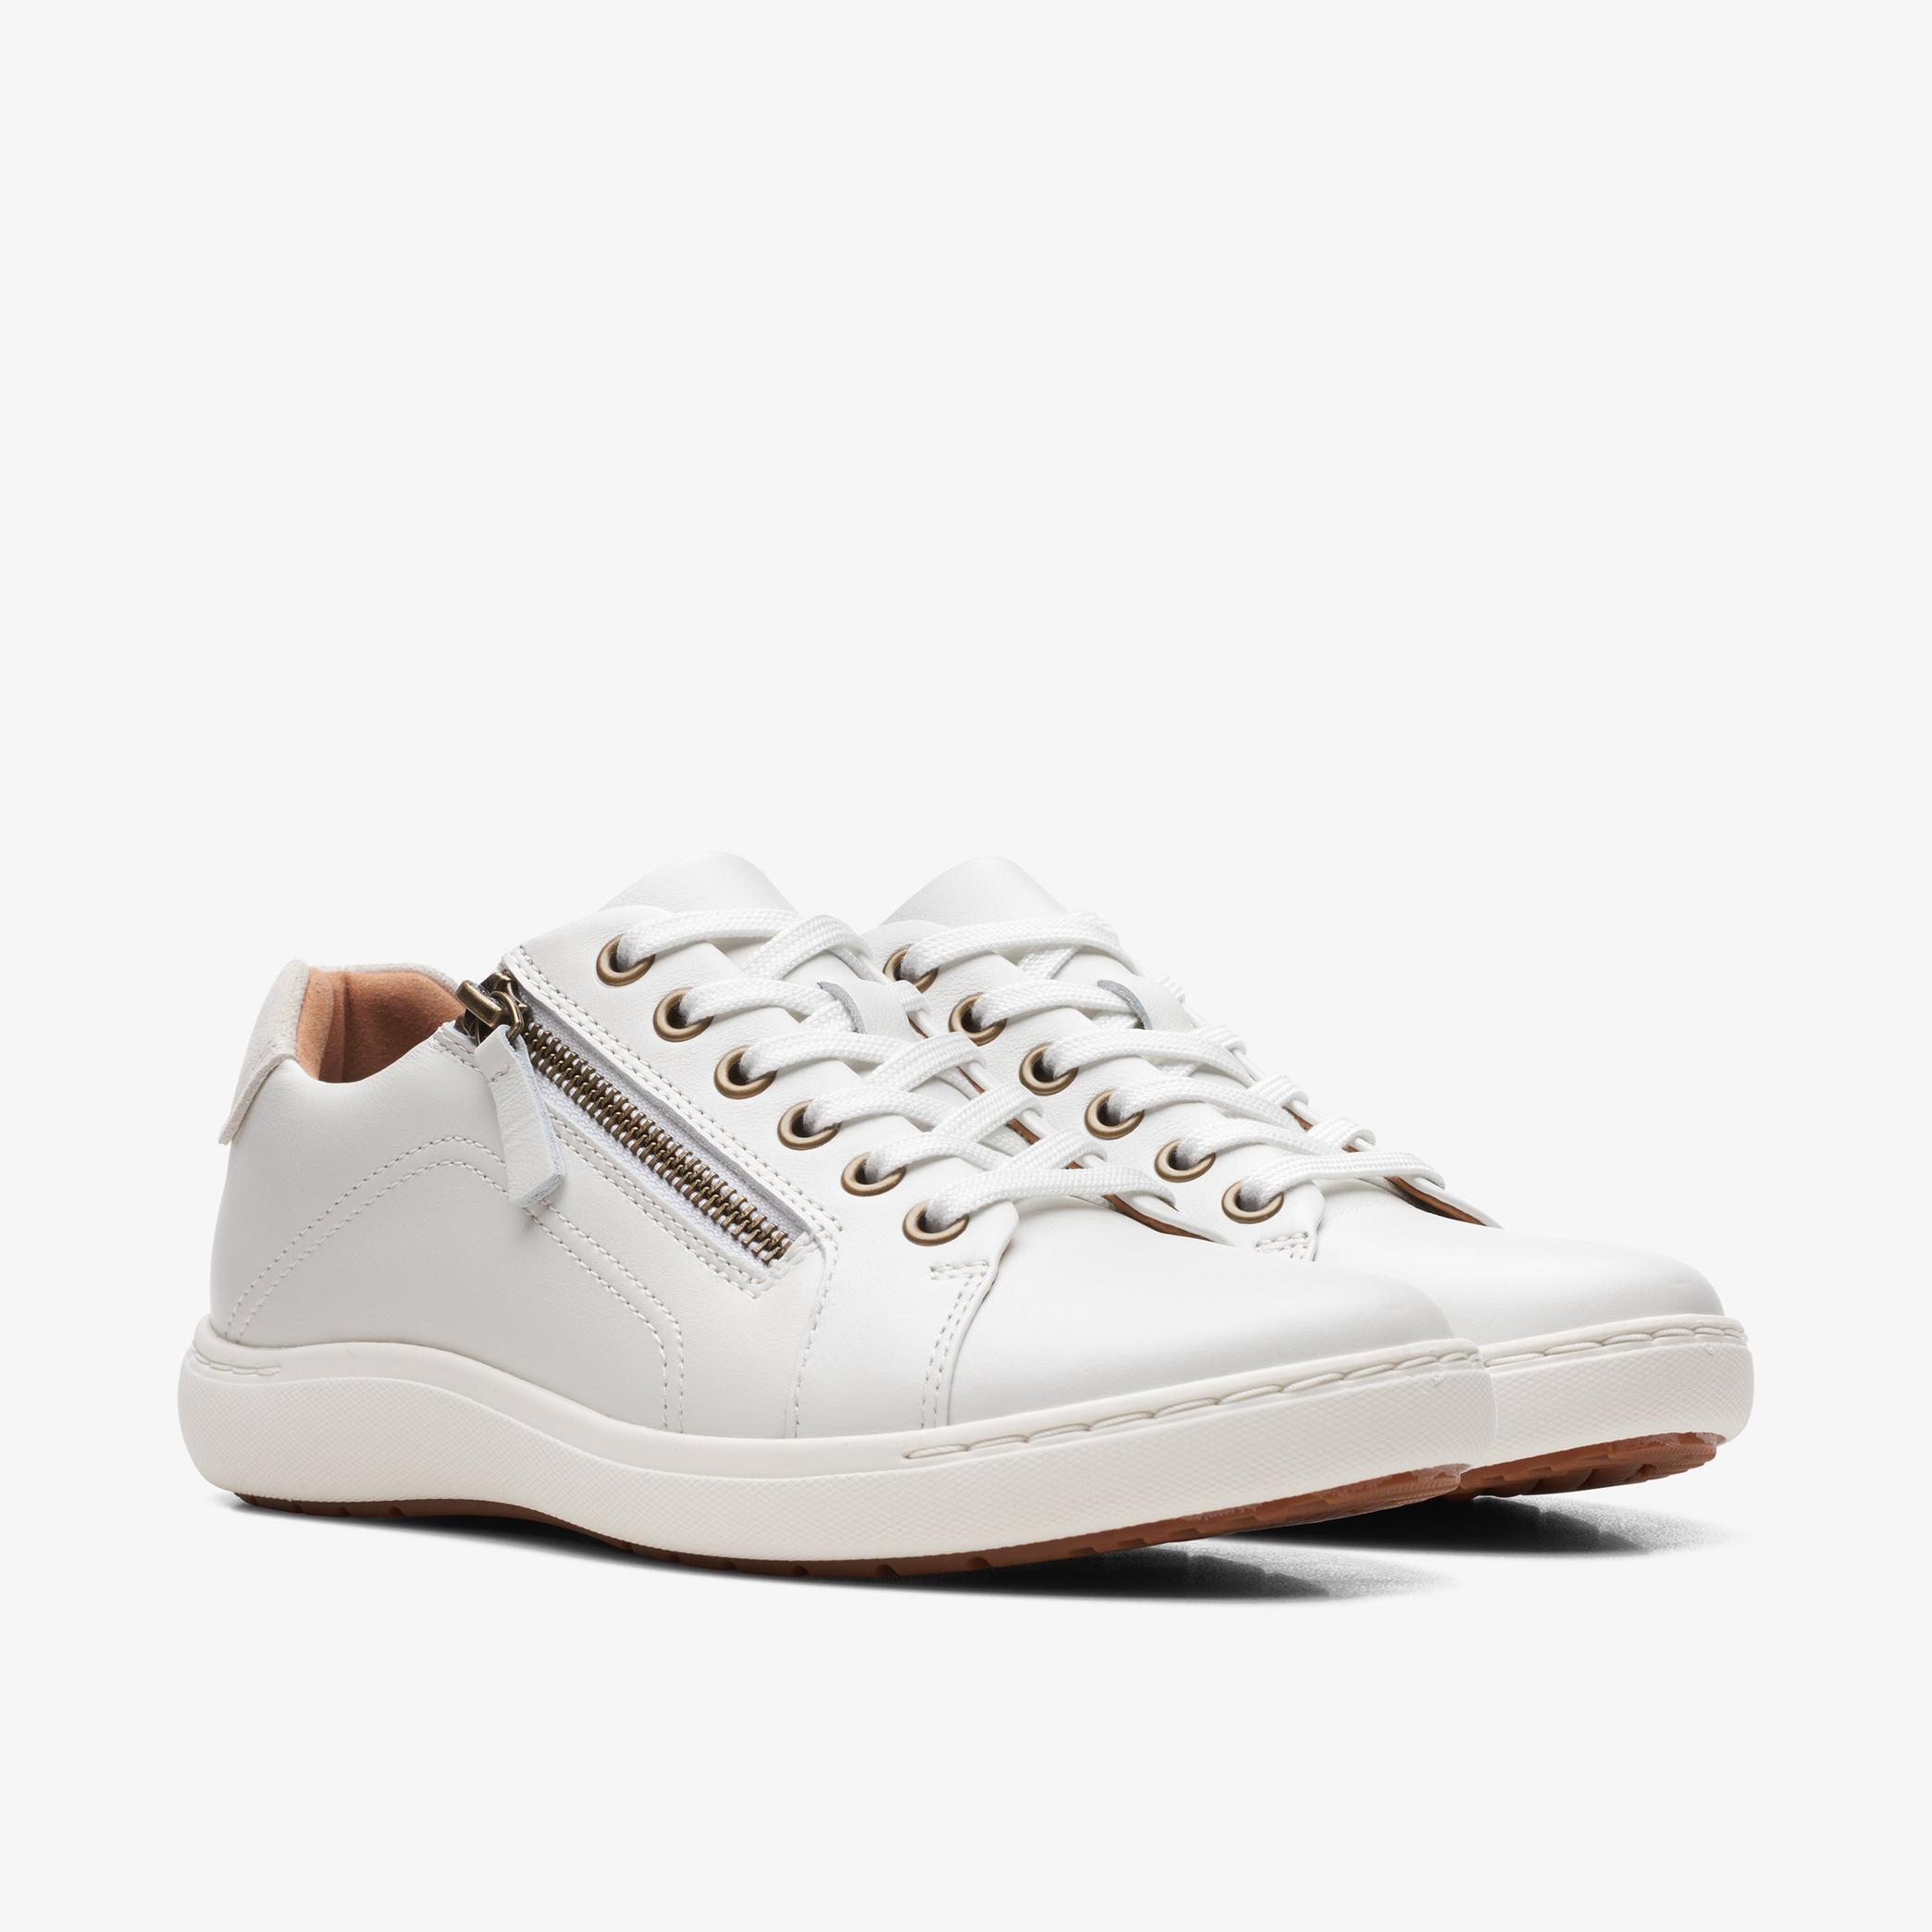 Nalle Lace White Leather Sneakers, view 4 of 6